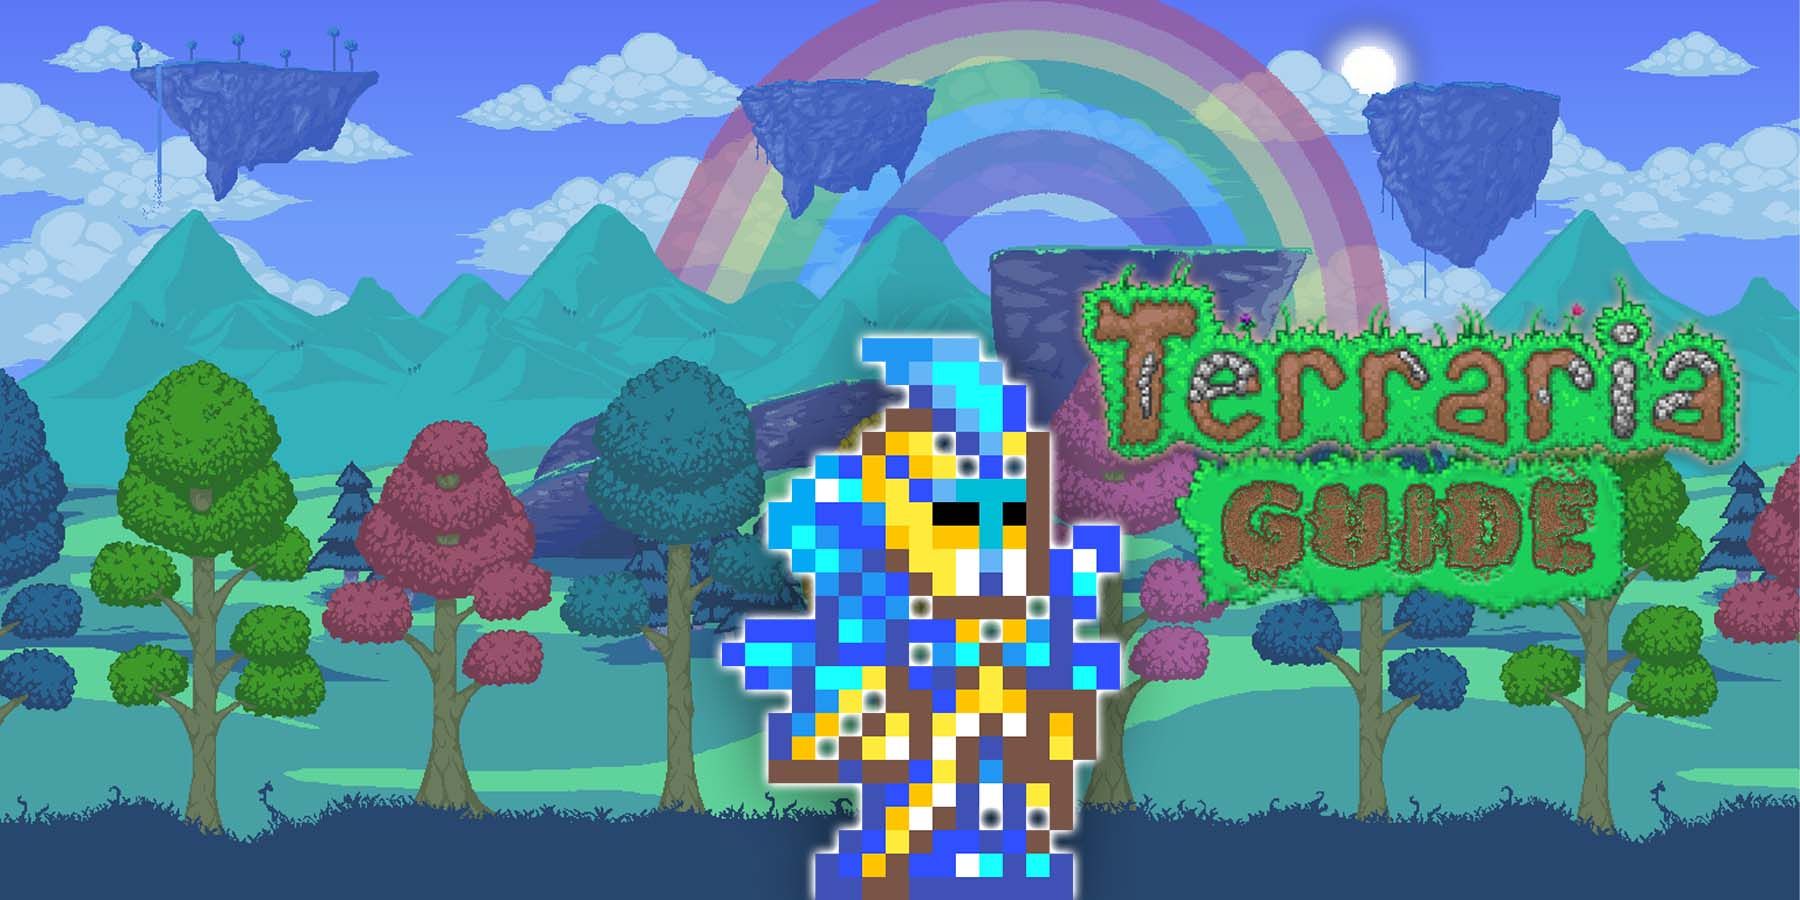 Noted Terraria Tips